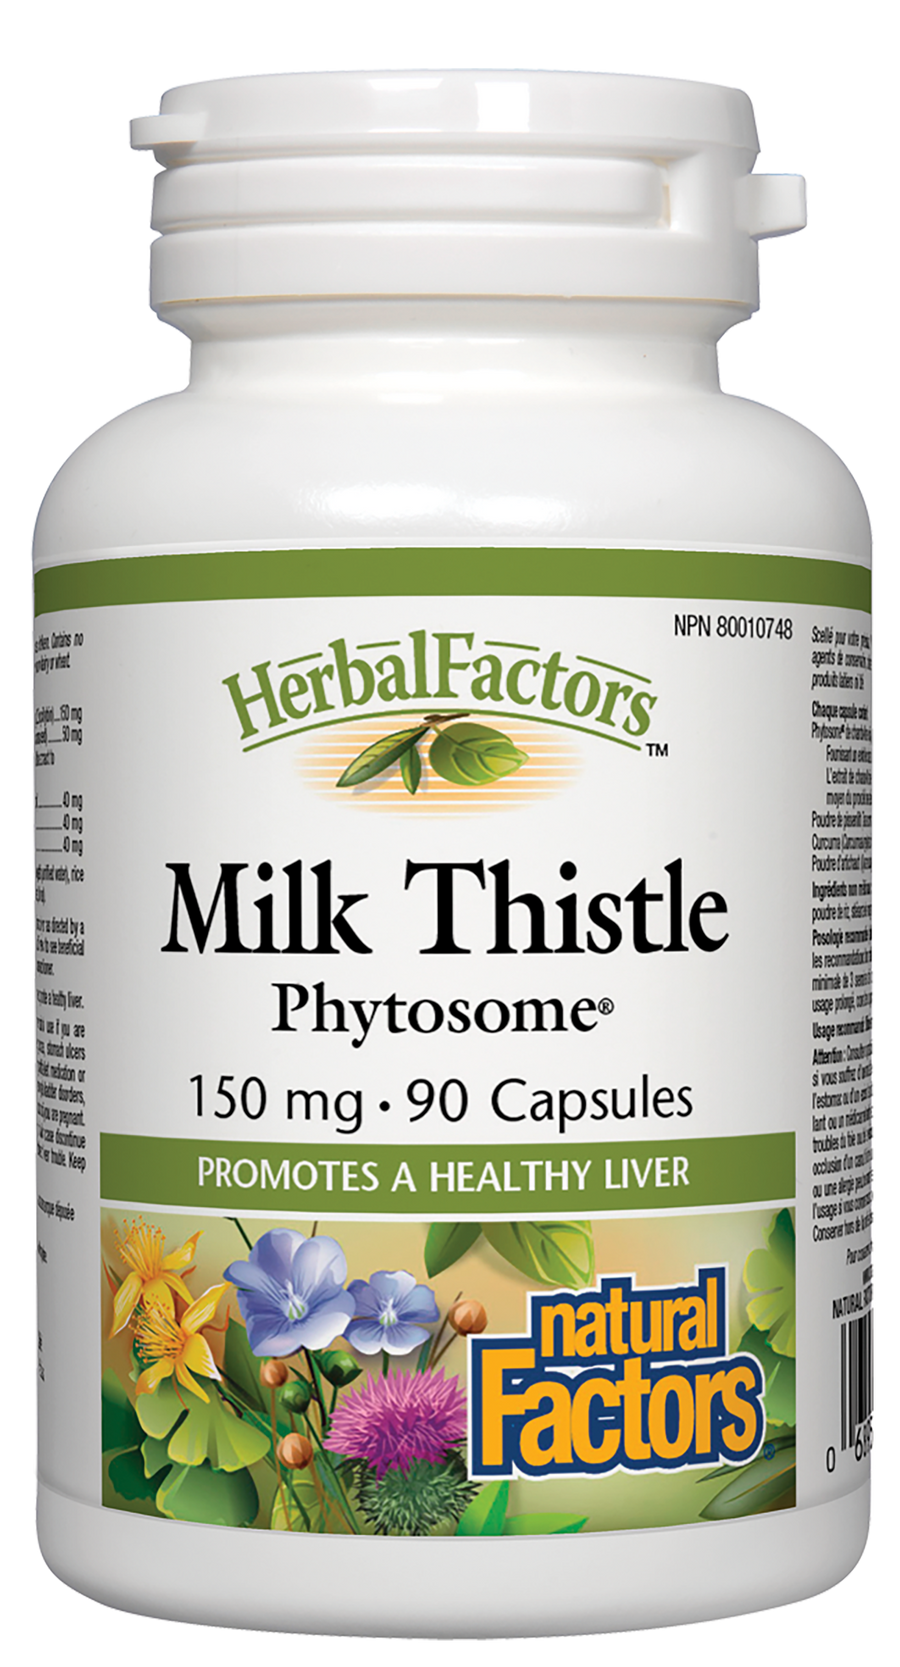 Natural Factors Milk Thistle Phytosome 150 mg 90 Capsules